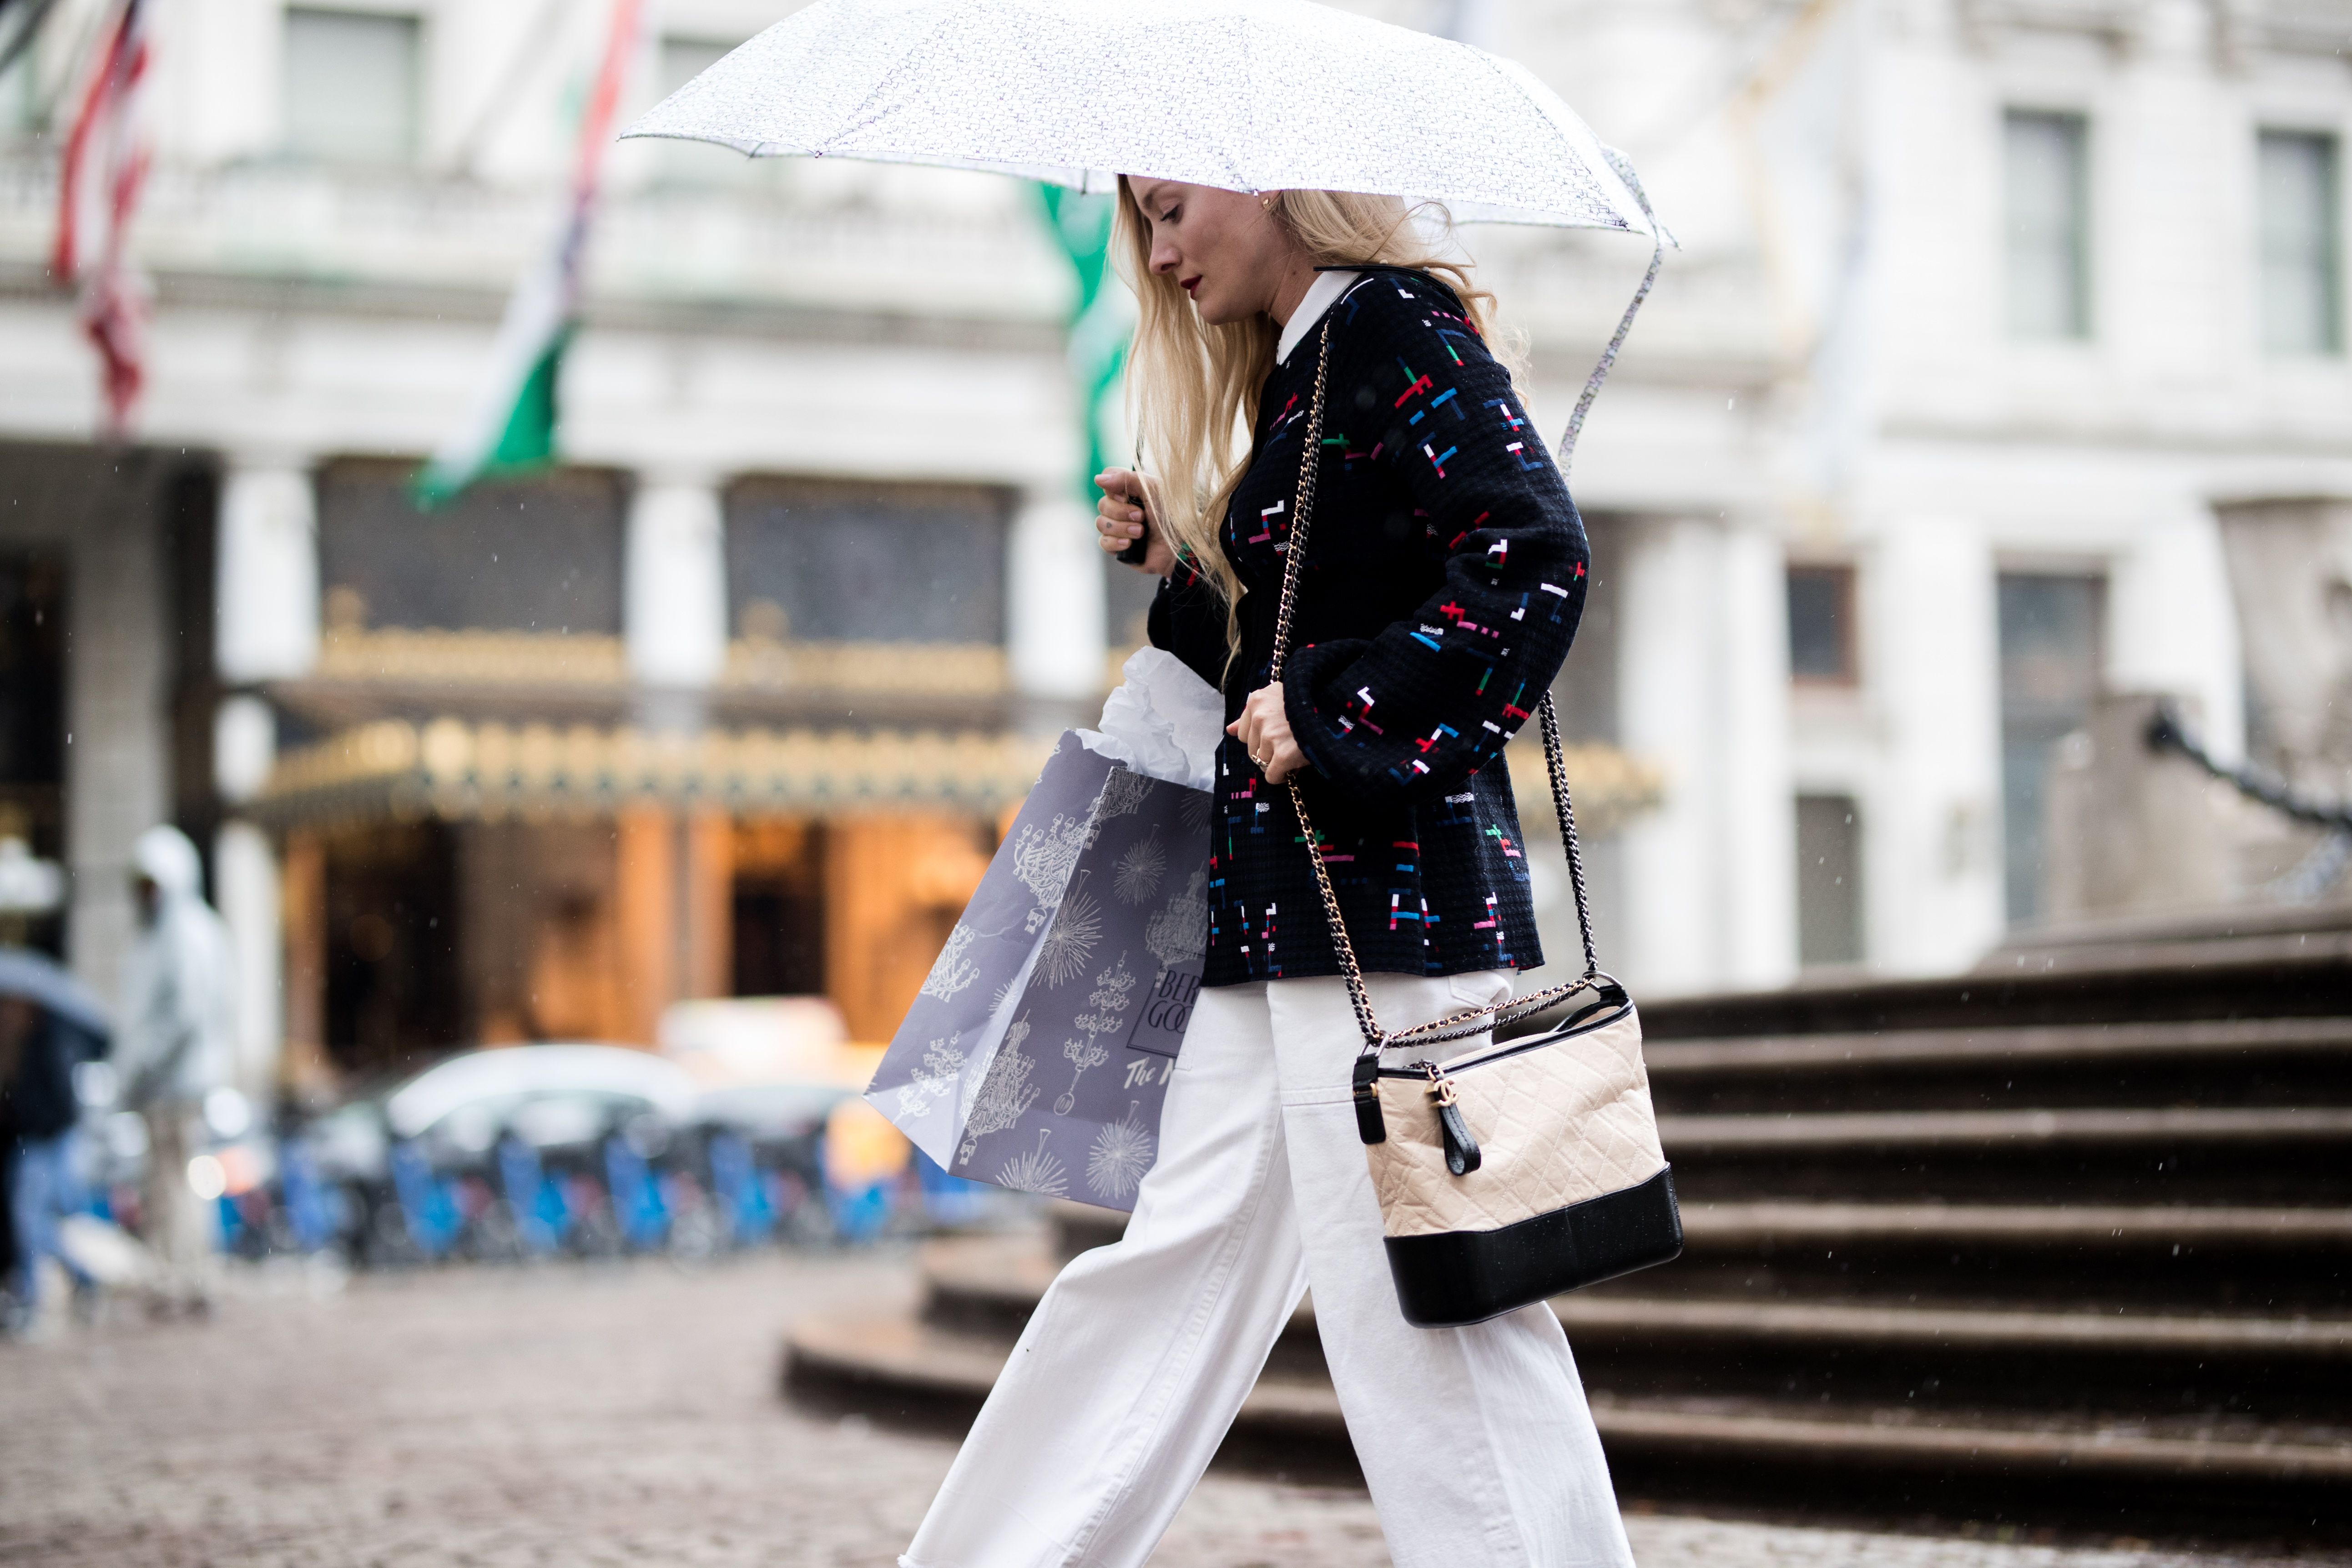 3 Ways To Wear The New Chanel Gabrielle Bag - A Constellation